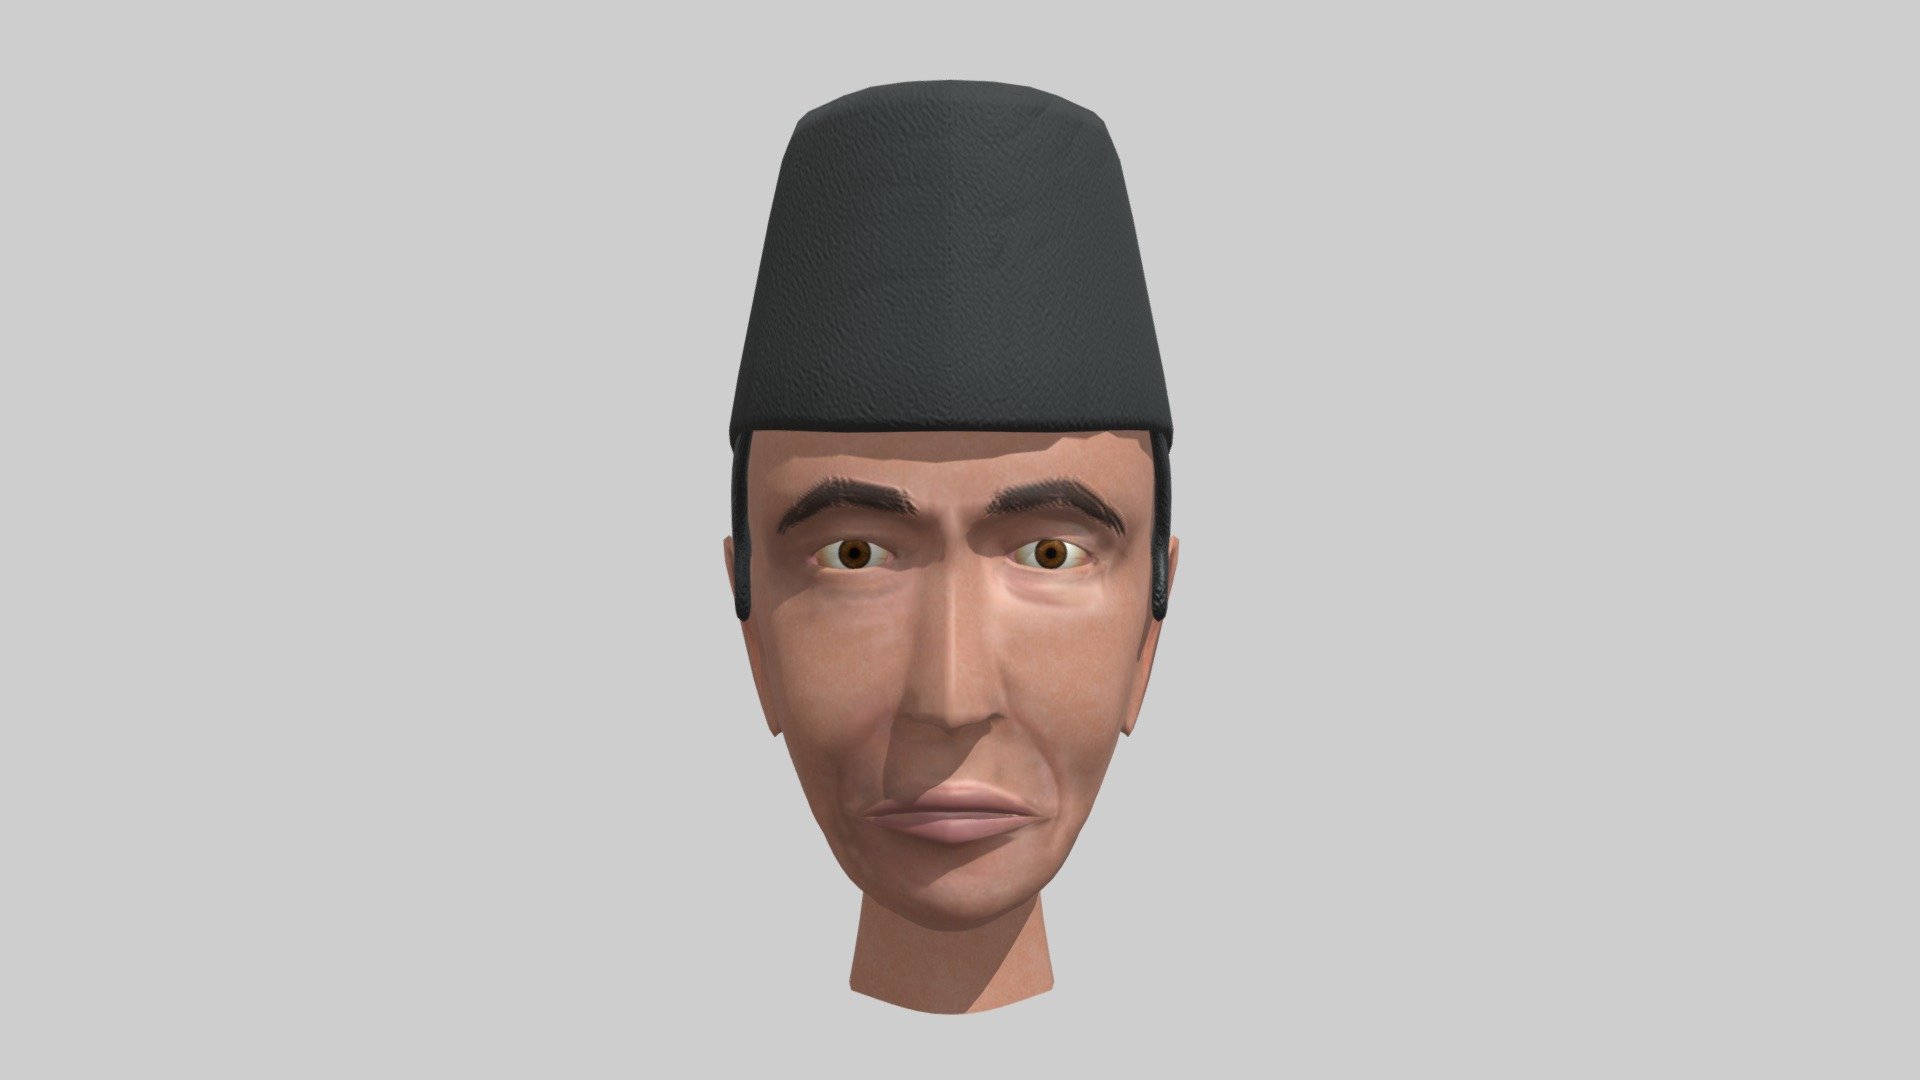 as a proud Indonesian, I decided to randomly modelling my current president to practice 3d model